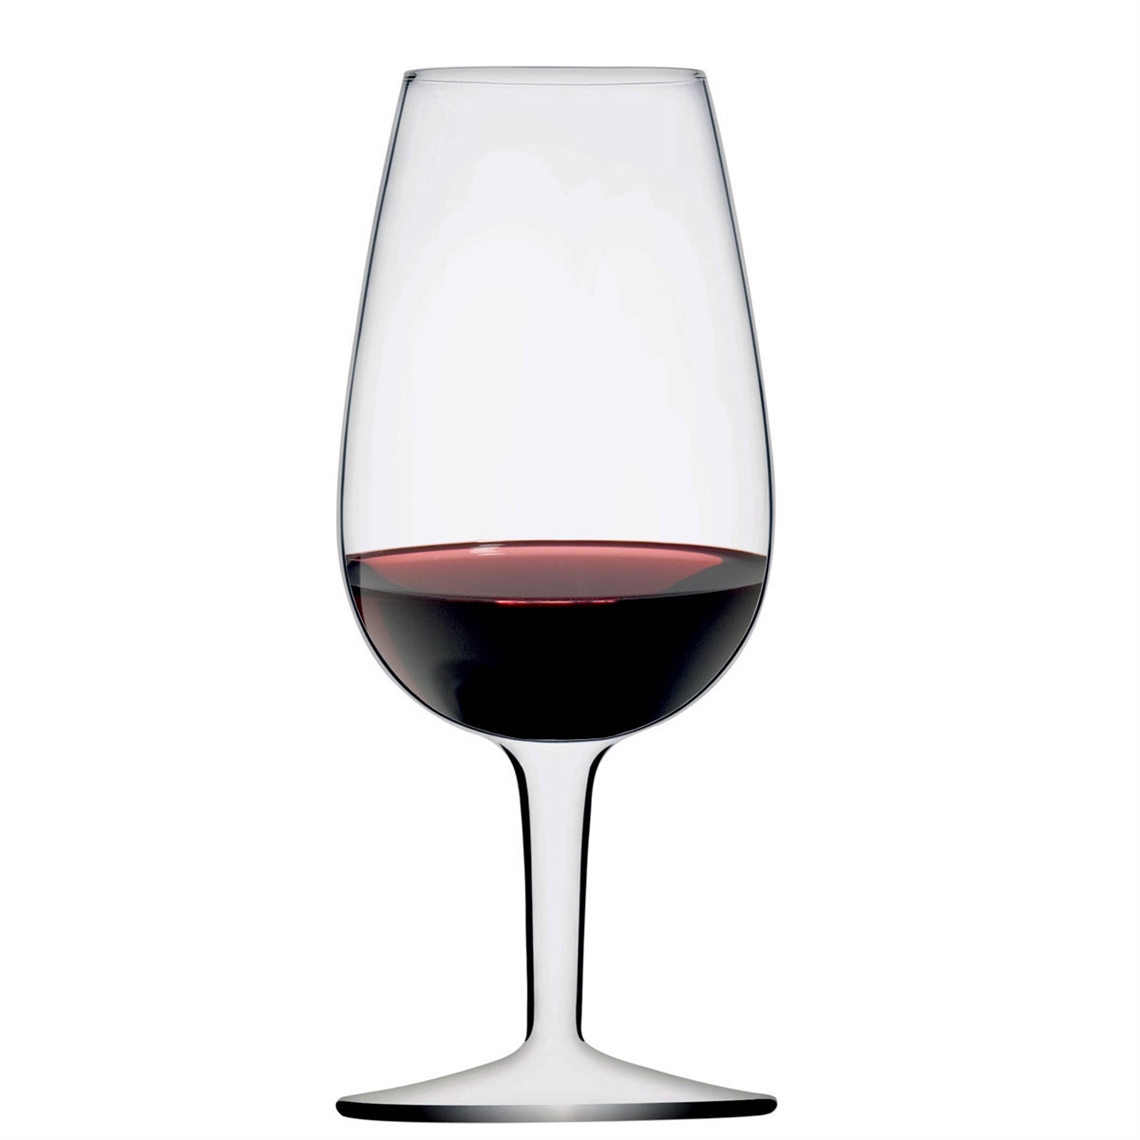 View more riedel extreme from our Wine Tasting Glasses range